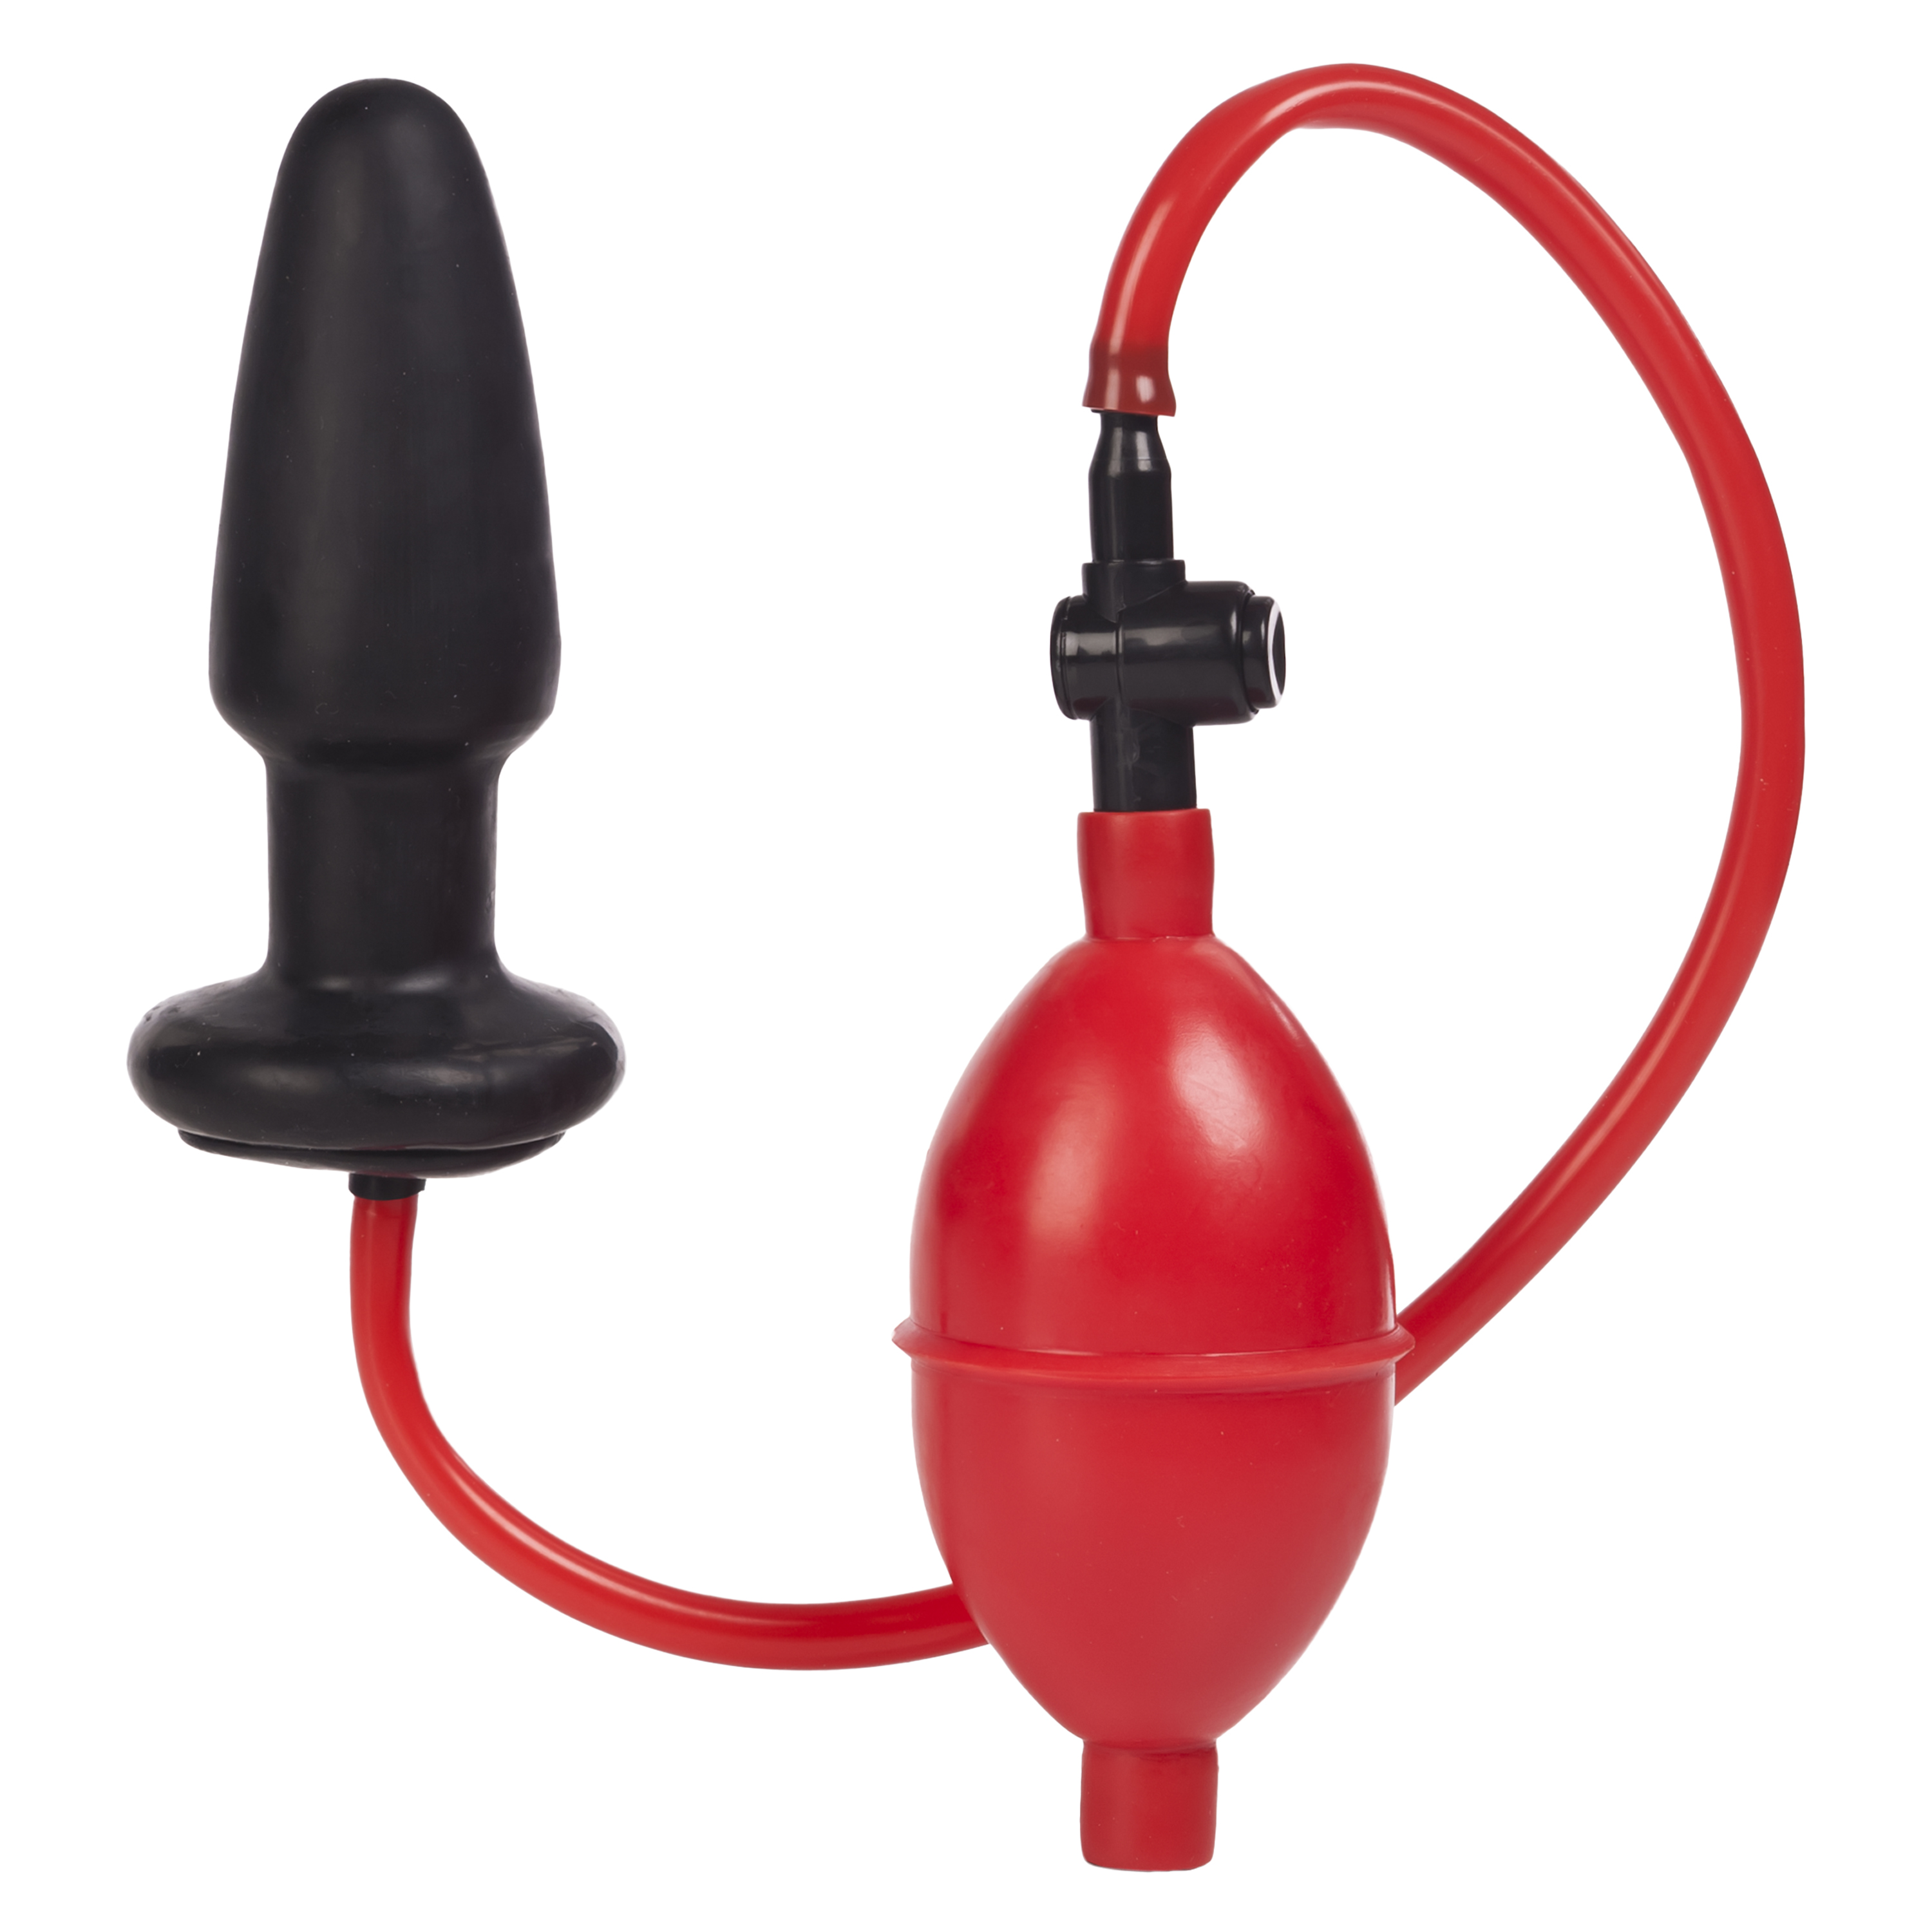 Expandable+Butt+Plug+Black+And+Red